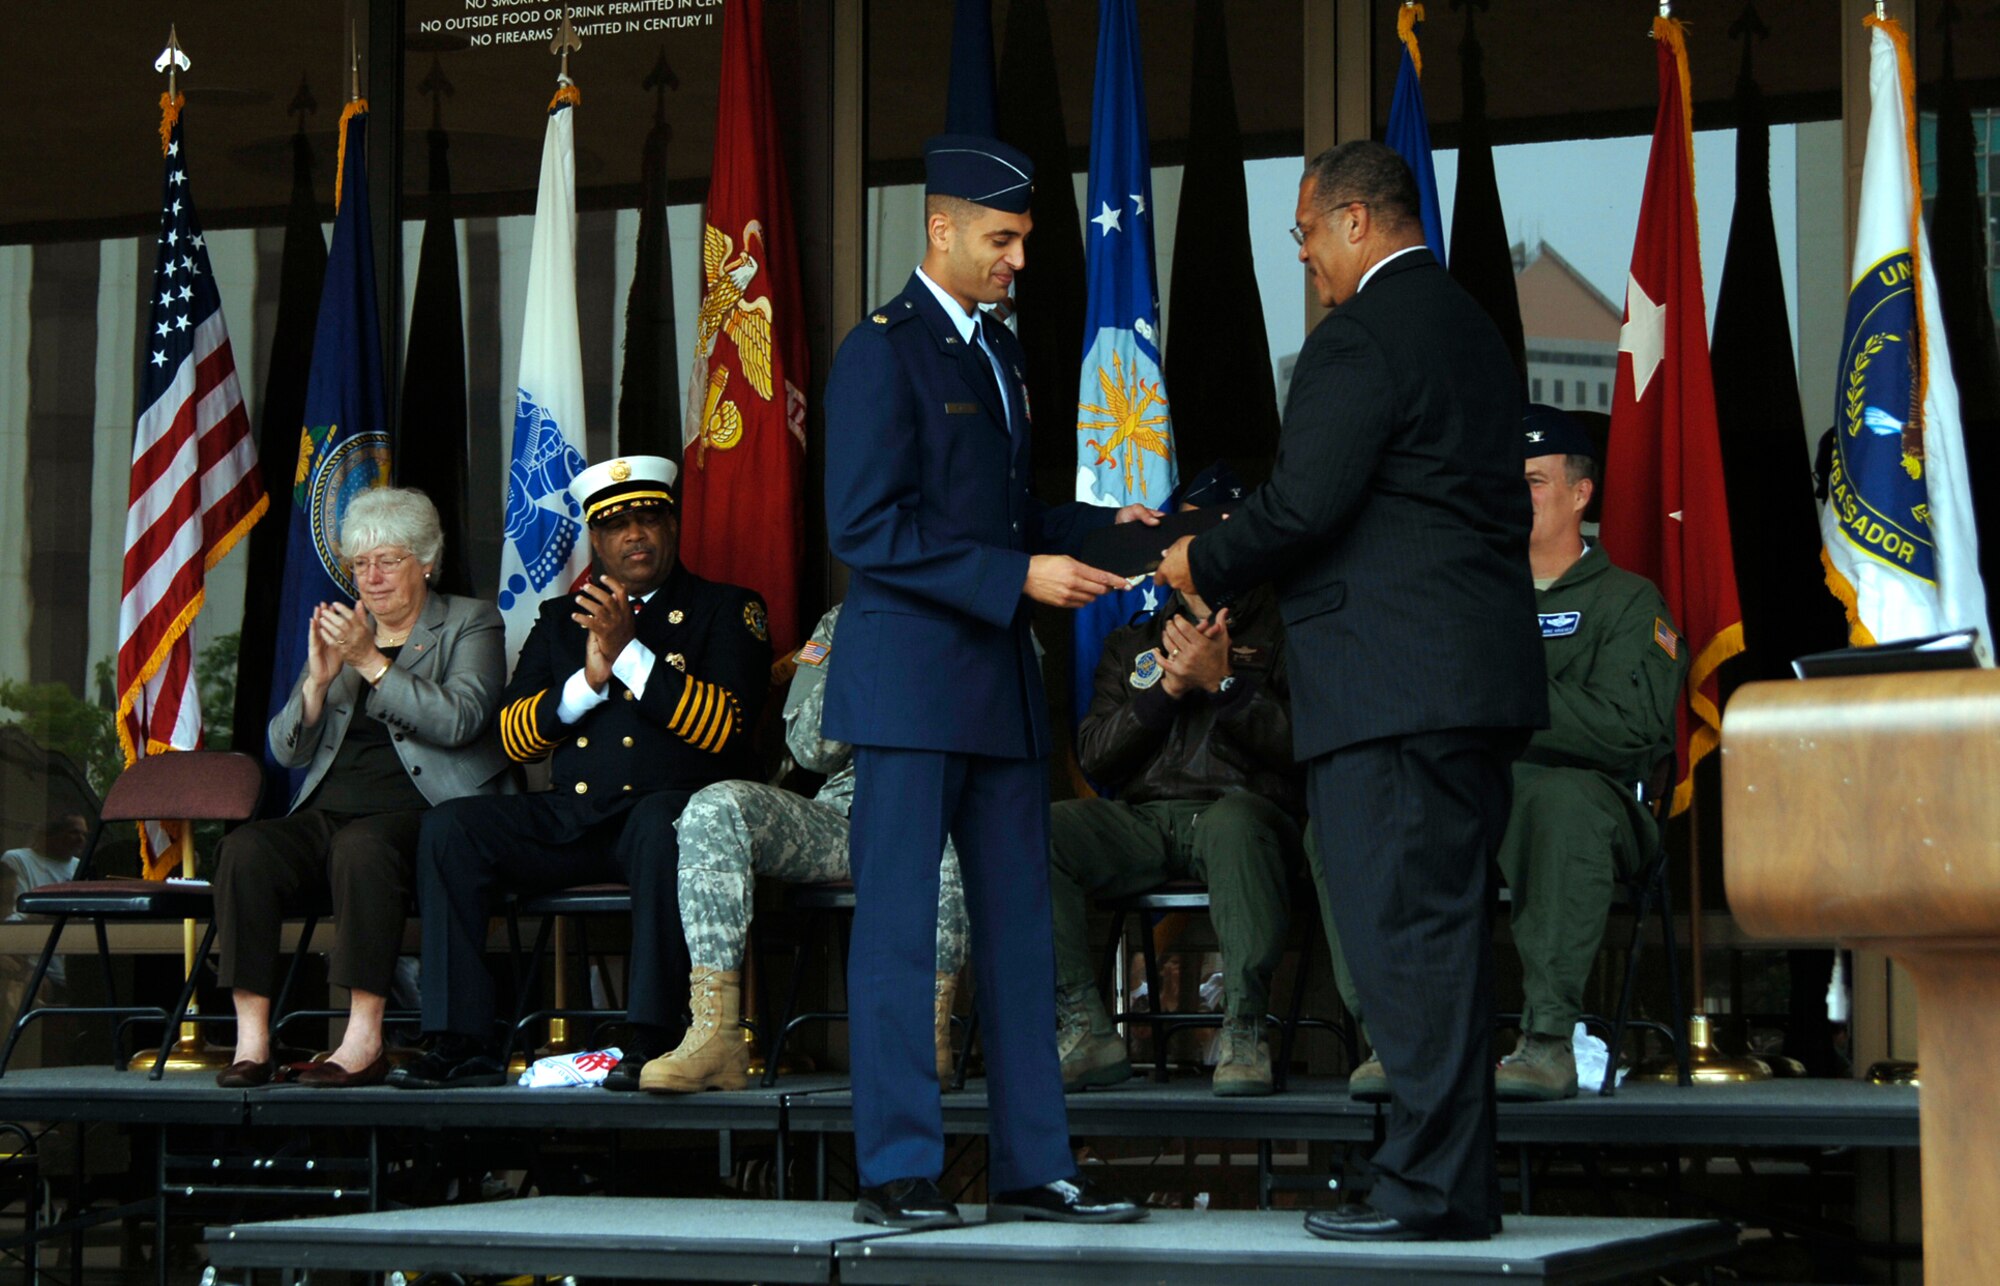 MCCONNELL AIR FORCE BASE, Kan. -- The Honorable Carl Brewer, Wichita’s Mayor, awards Maj. Paul Silas, 22nd Civil Engineer Squadron operations flight commander, a  during the first Wichita “America Supports You” Freedom Walk closing comments, Sept. 12. Major Silas was recognized for his performance as a truck commander when his team was ambushed by small-arms fire and rocket-propelled grenades in Afghanistan, from September 2007 through April 2008.  (Photo by Staff Sgt. Ronald Lafosse)